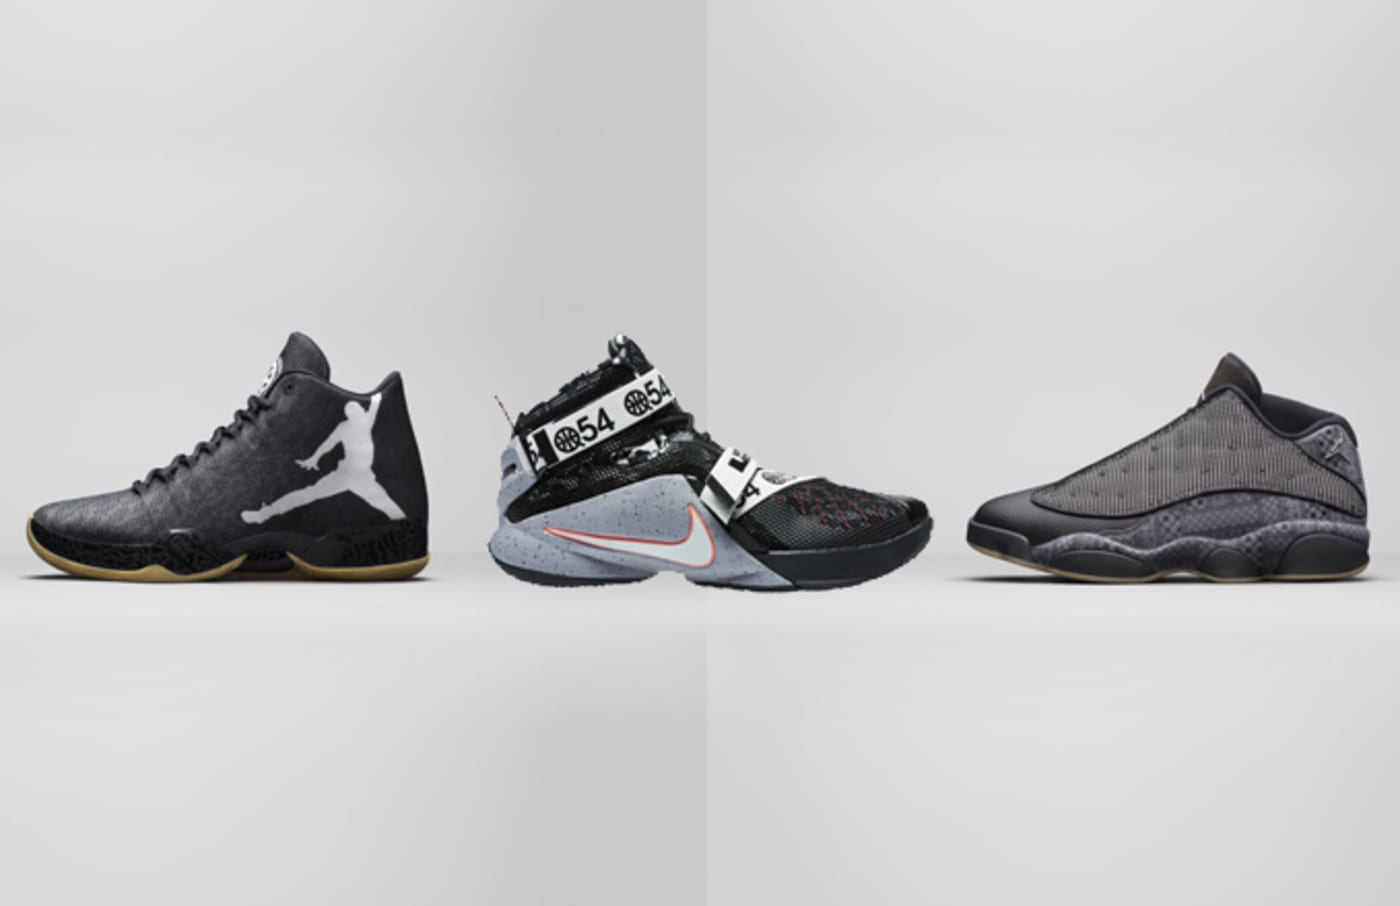 Nike Officially Unveiled the 2015 Air Jordan Quai 54 Collection | Complex